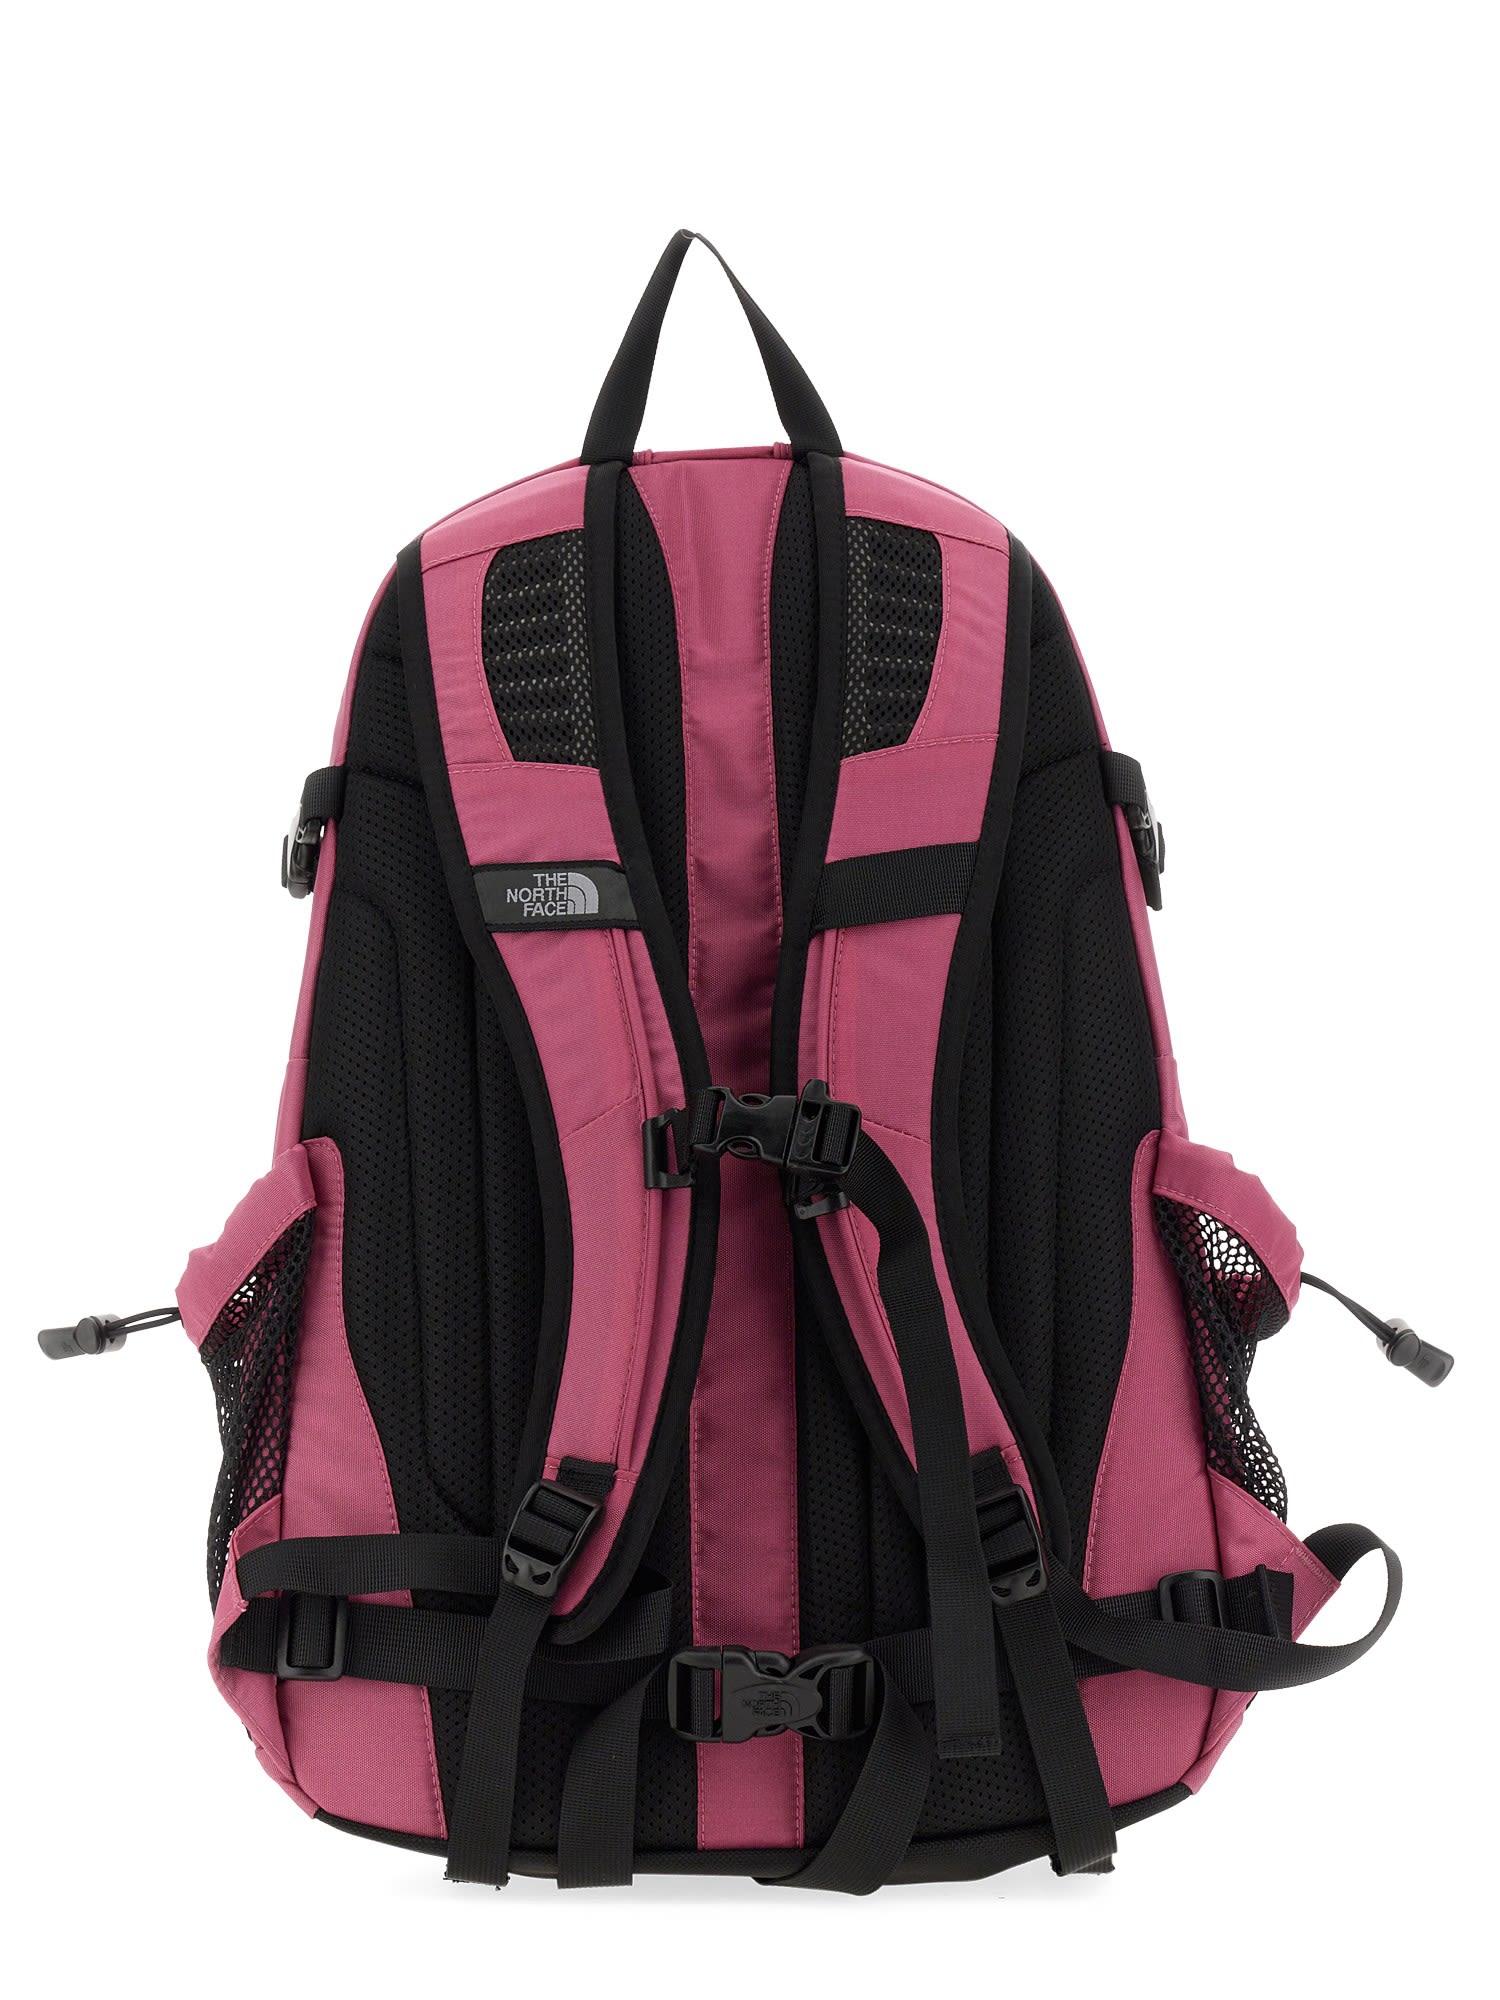 The North Face Hot Shot Backpack in Pink Womens Bags Backpacks 